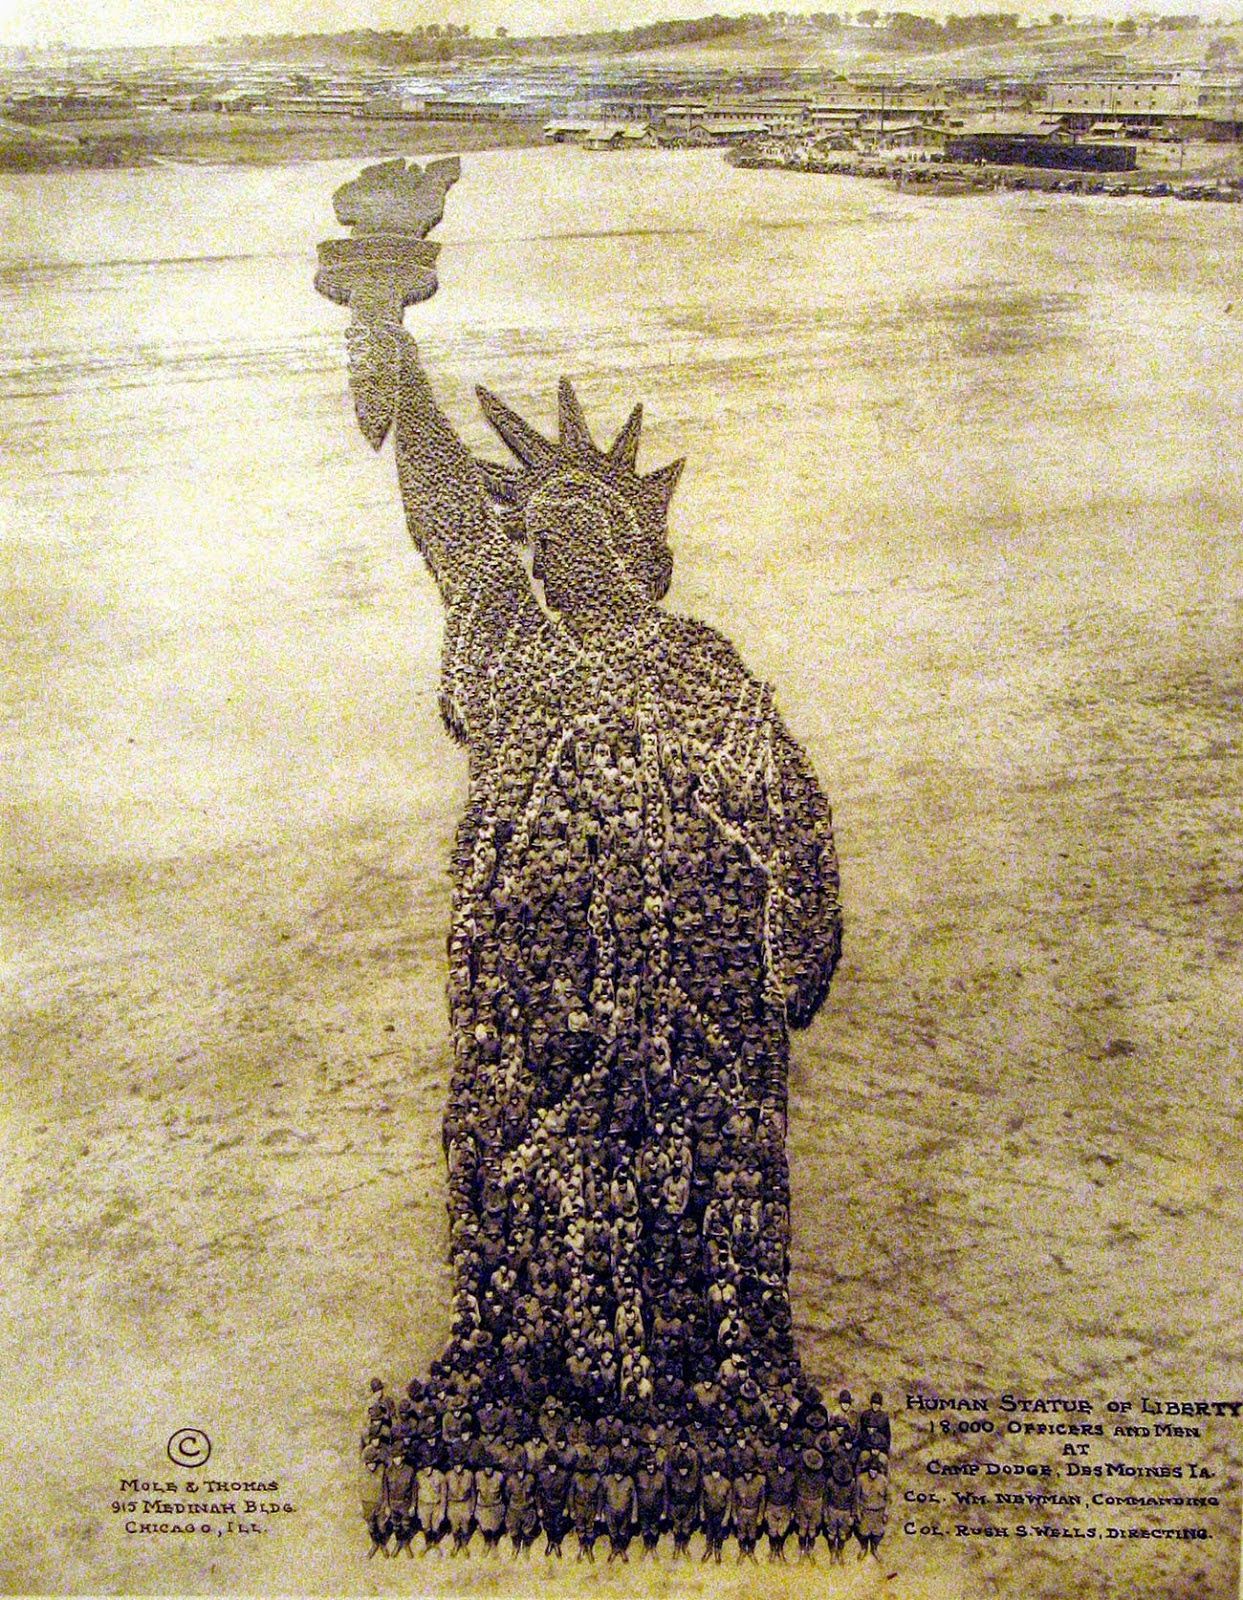 Pictures Formed by Thousands of US Soldiers during World War I (1).jpg